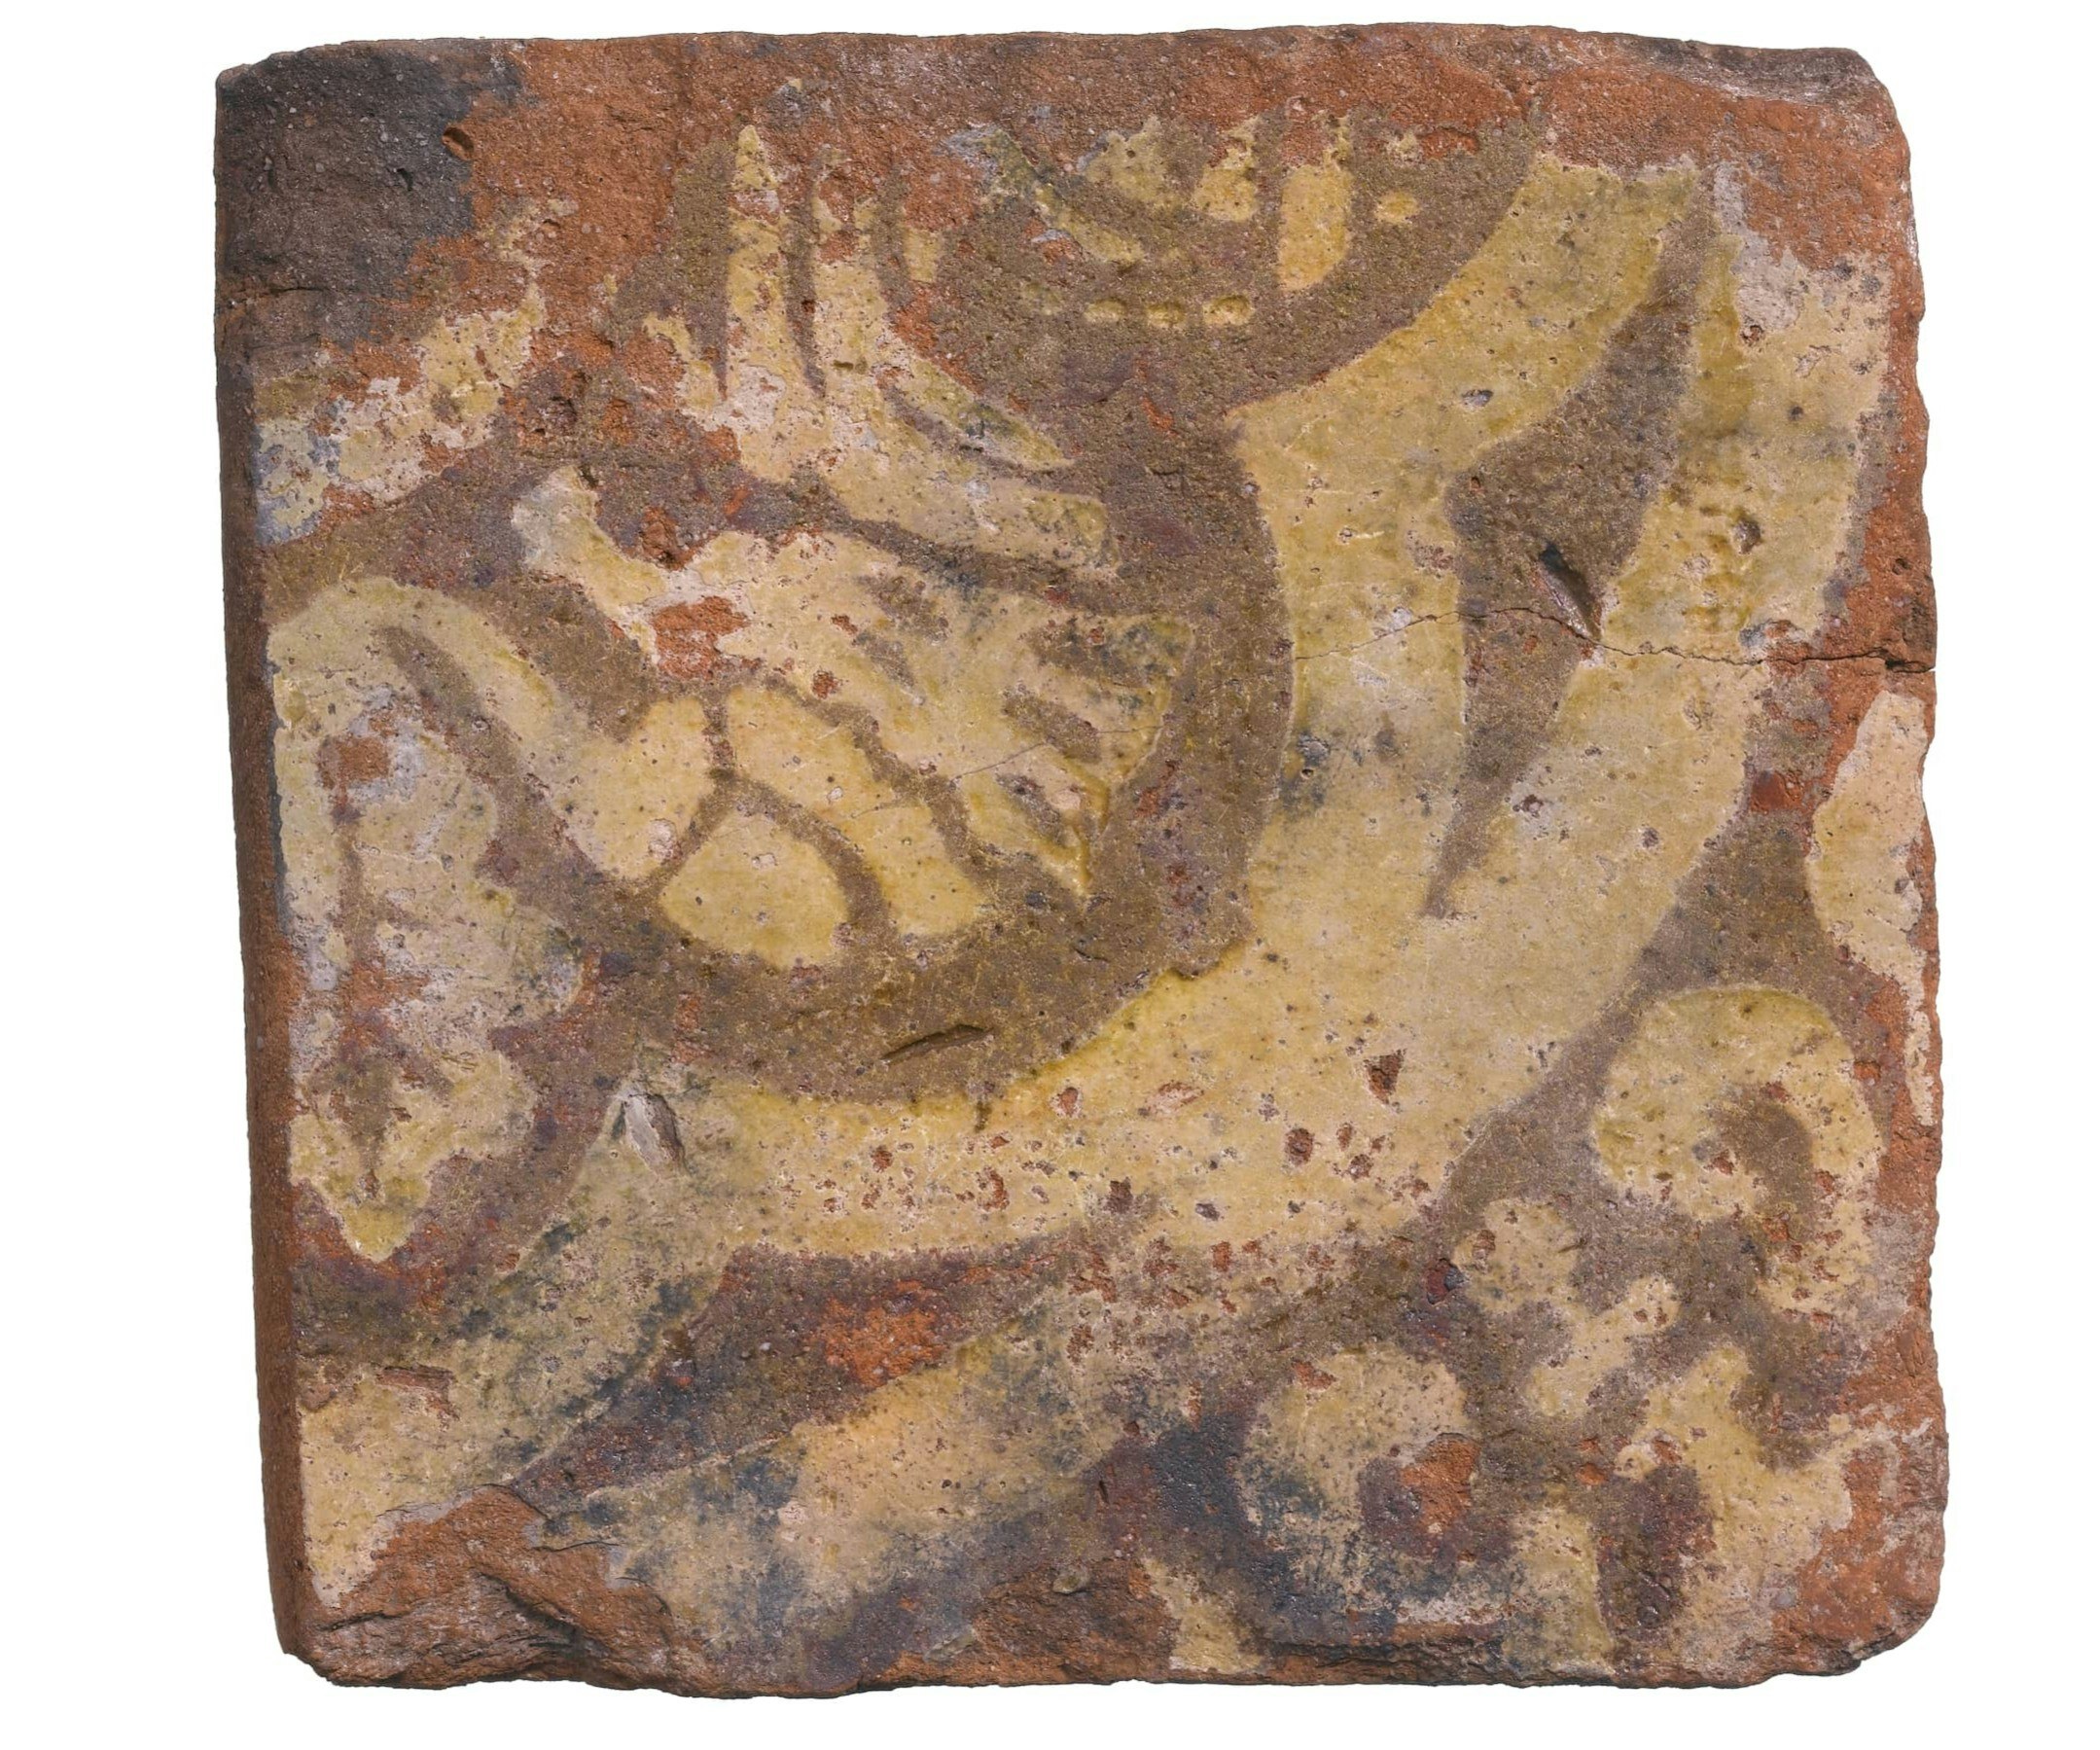 Part of a four-tile panel from a tilery at Penn, Buckinghamshire, dating to around 1350 –1390 